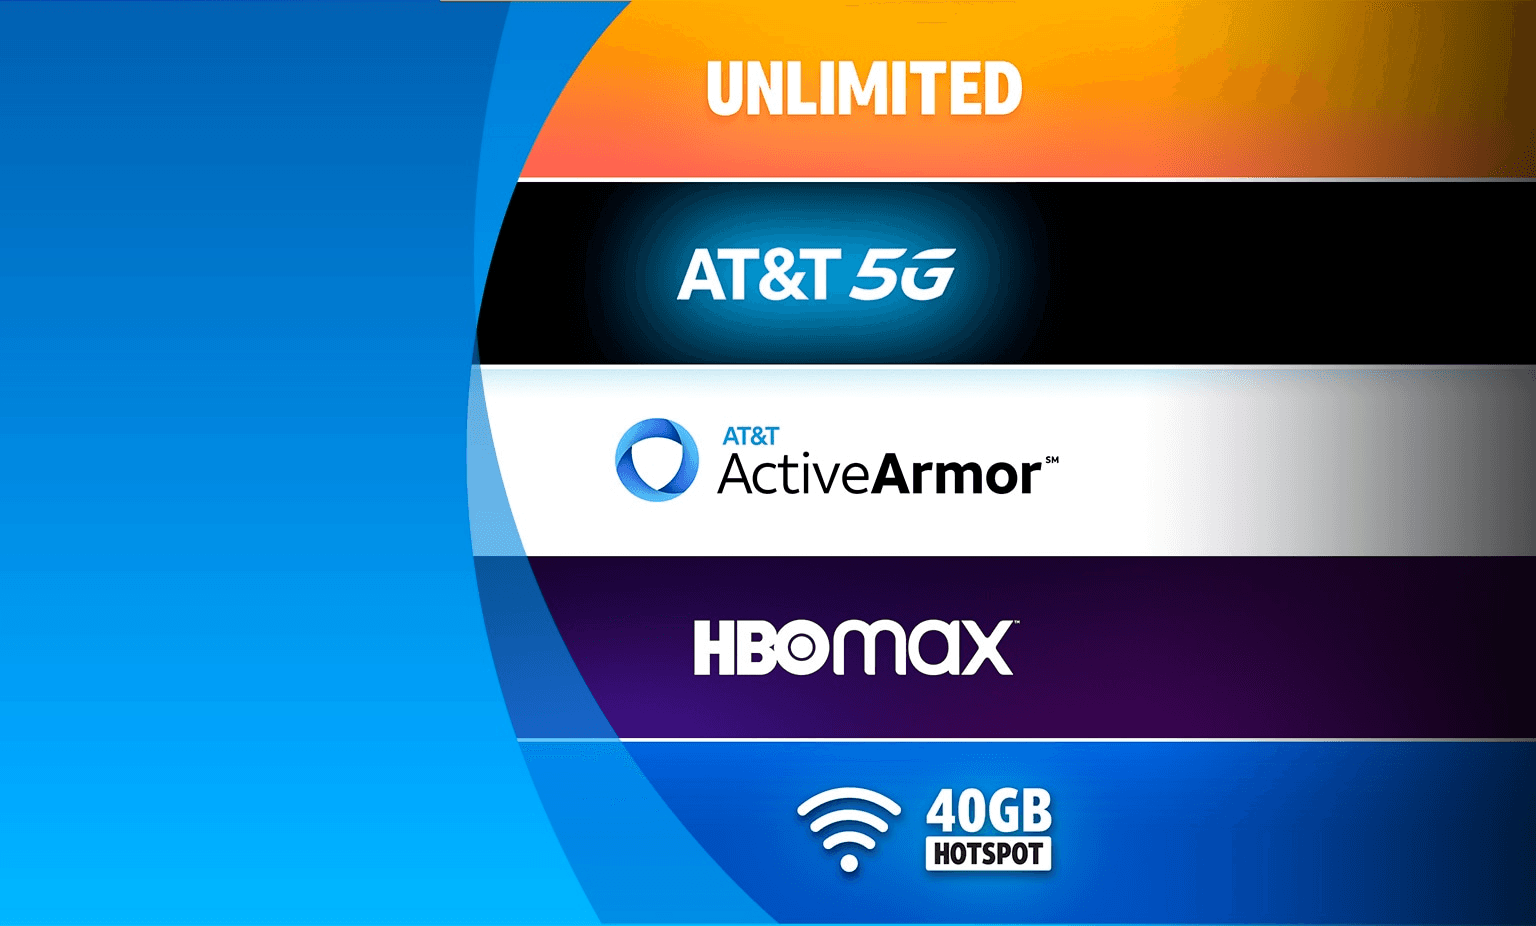 AT&T Unlimited Plan with a free HBO account